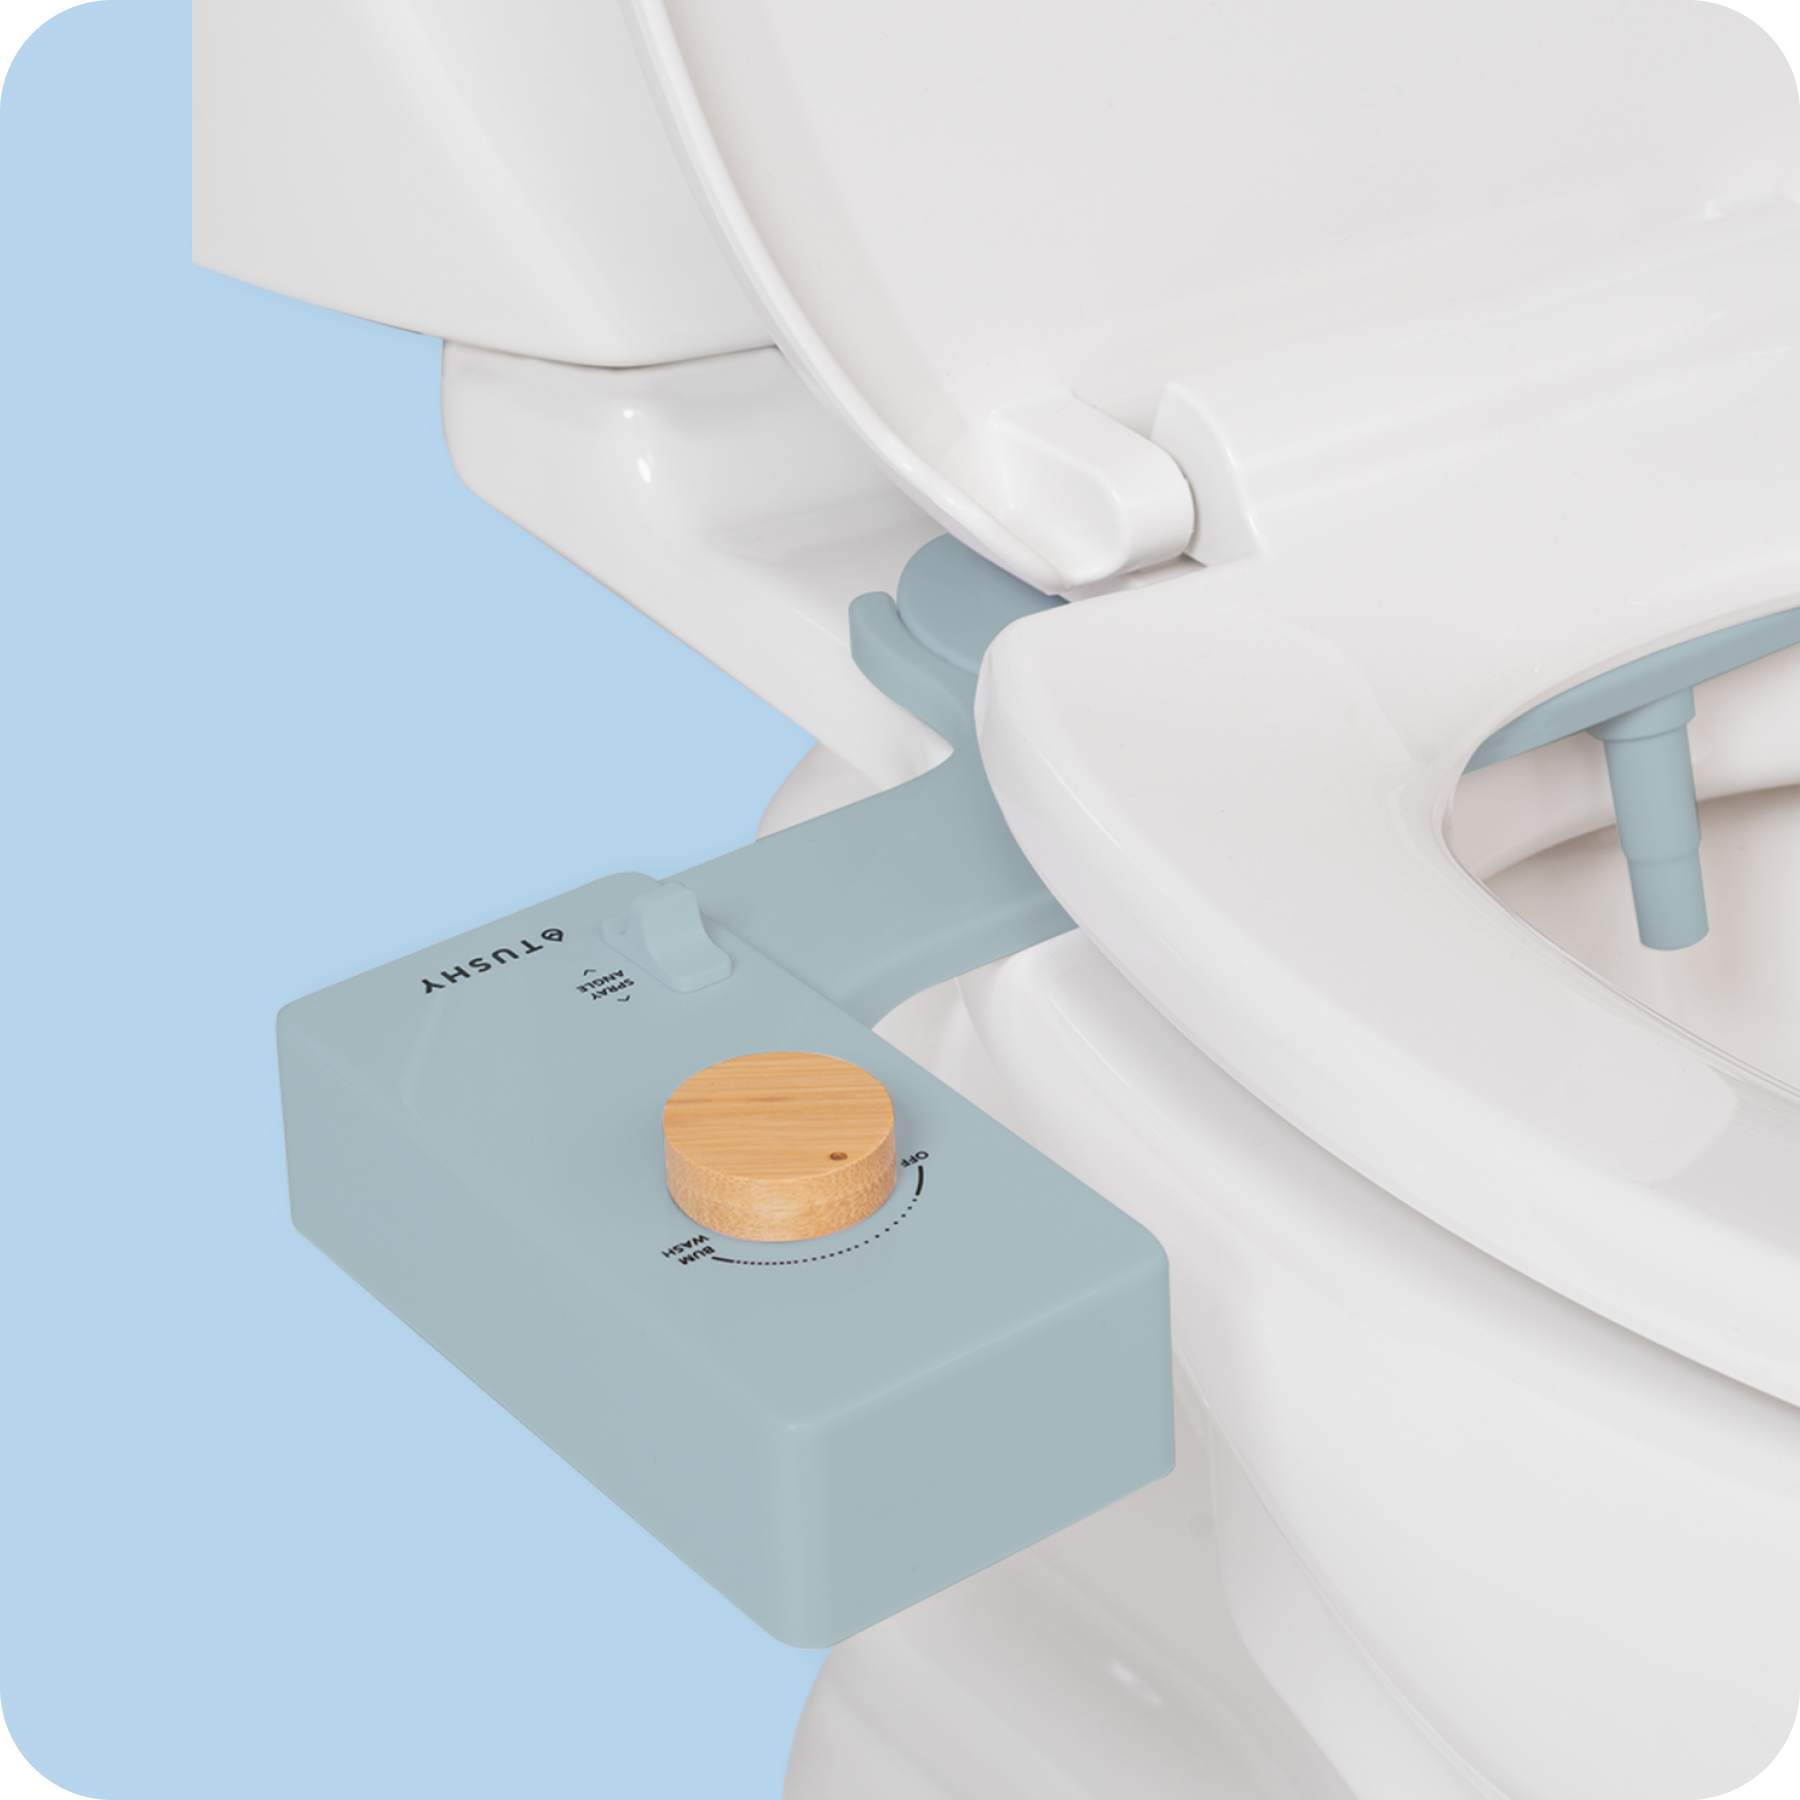 Tushy Classic 3.0 Blue/Bamboo - a classic affordable bidet attachment by TUSHY